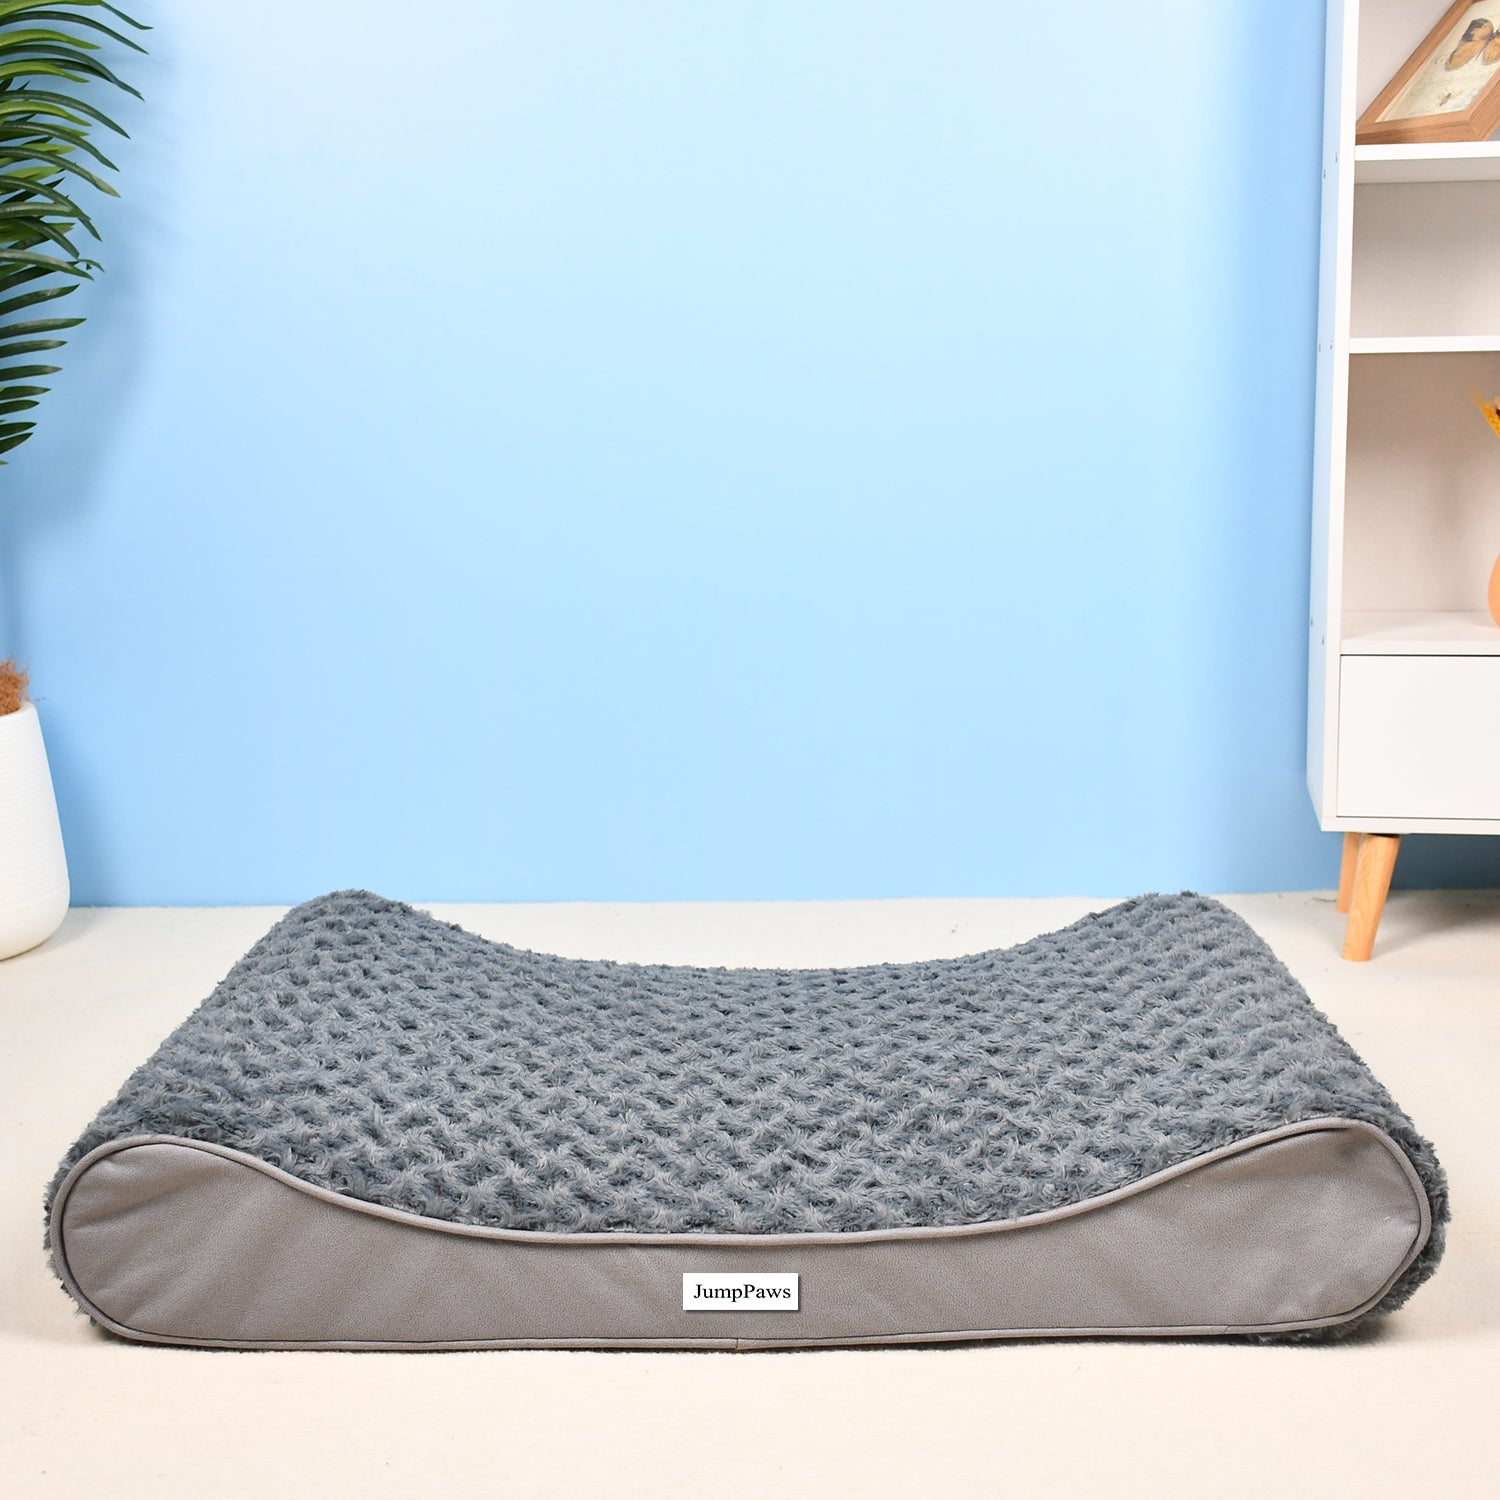 JumpPaws Dog Pillow for Household, Comfortable Indoor & Outdoor Pet Pillow, Grey, 36''